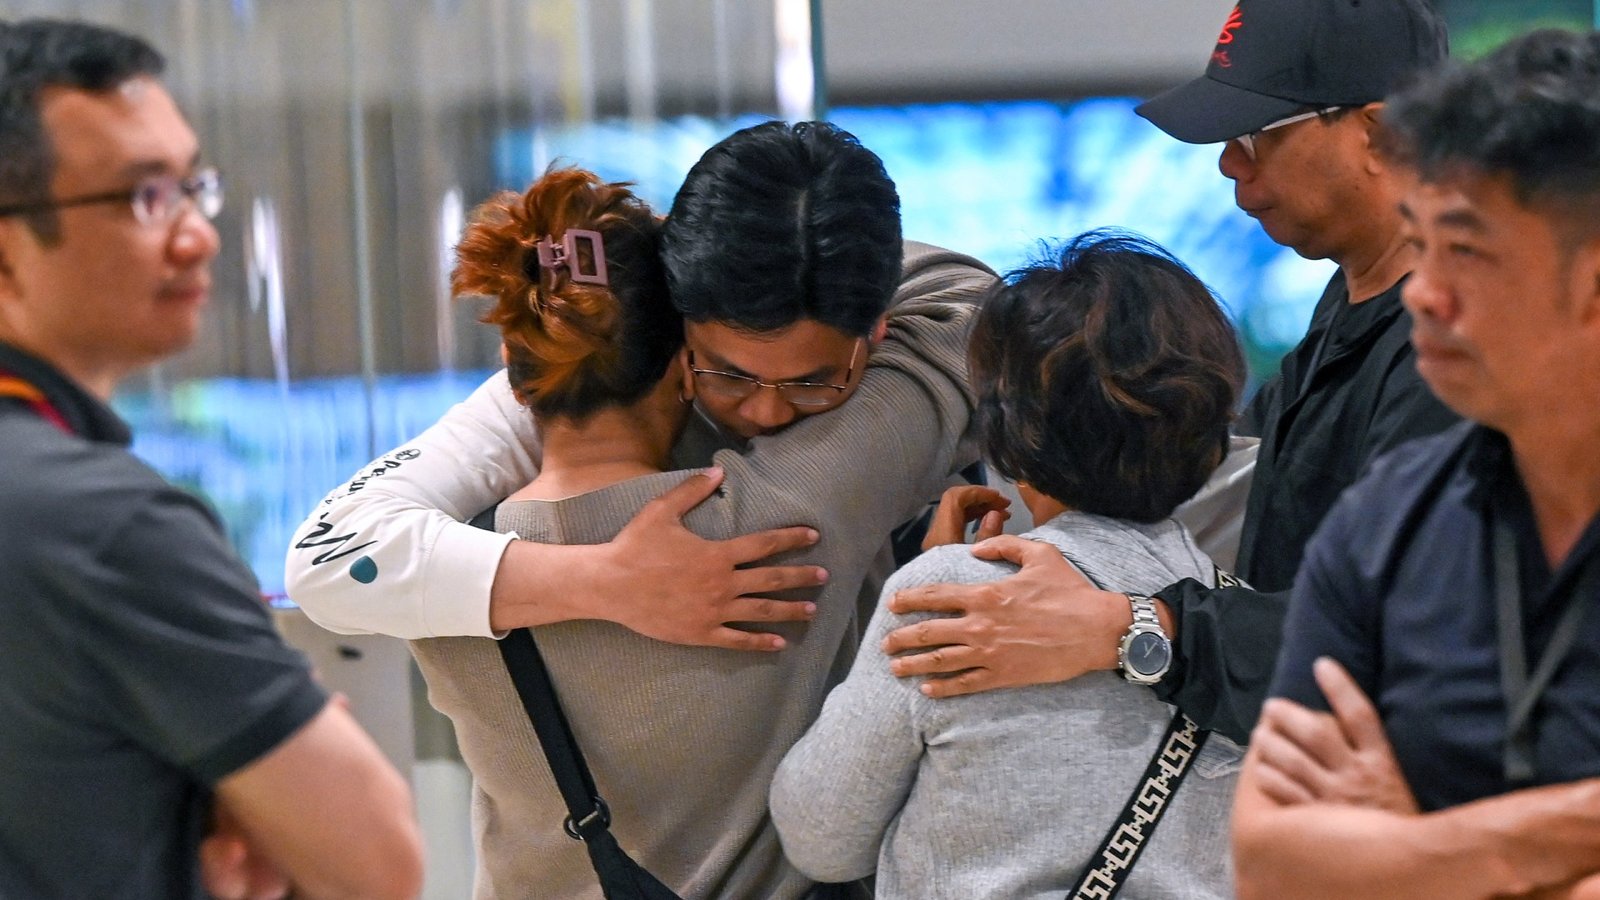 Passengers did somersaults in 7000ft drop that killed granddad 73 as Singapore flight survivors greet loved ones